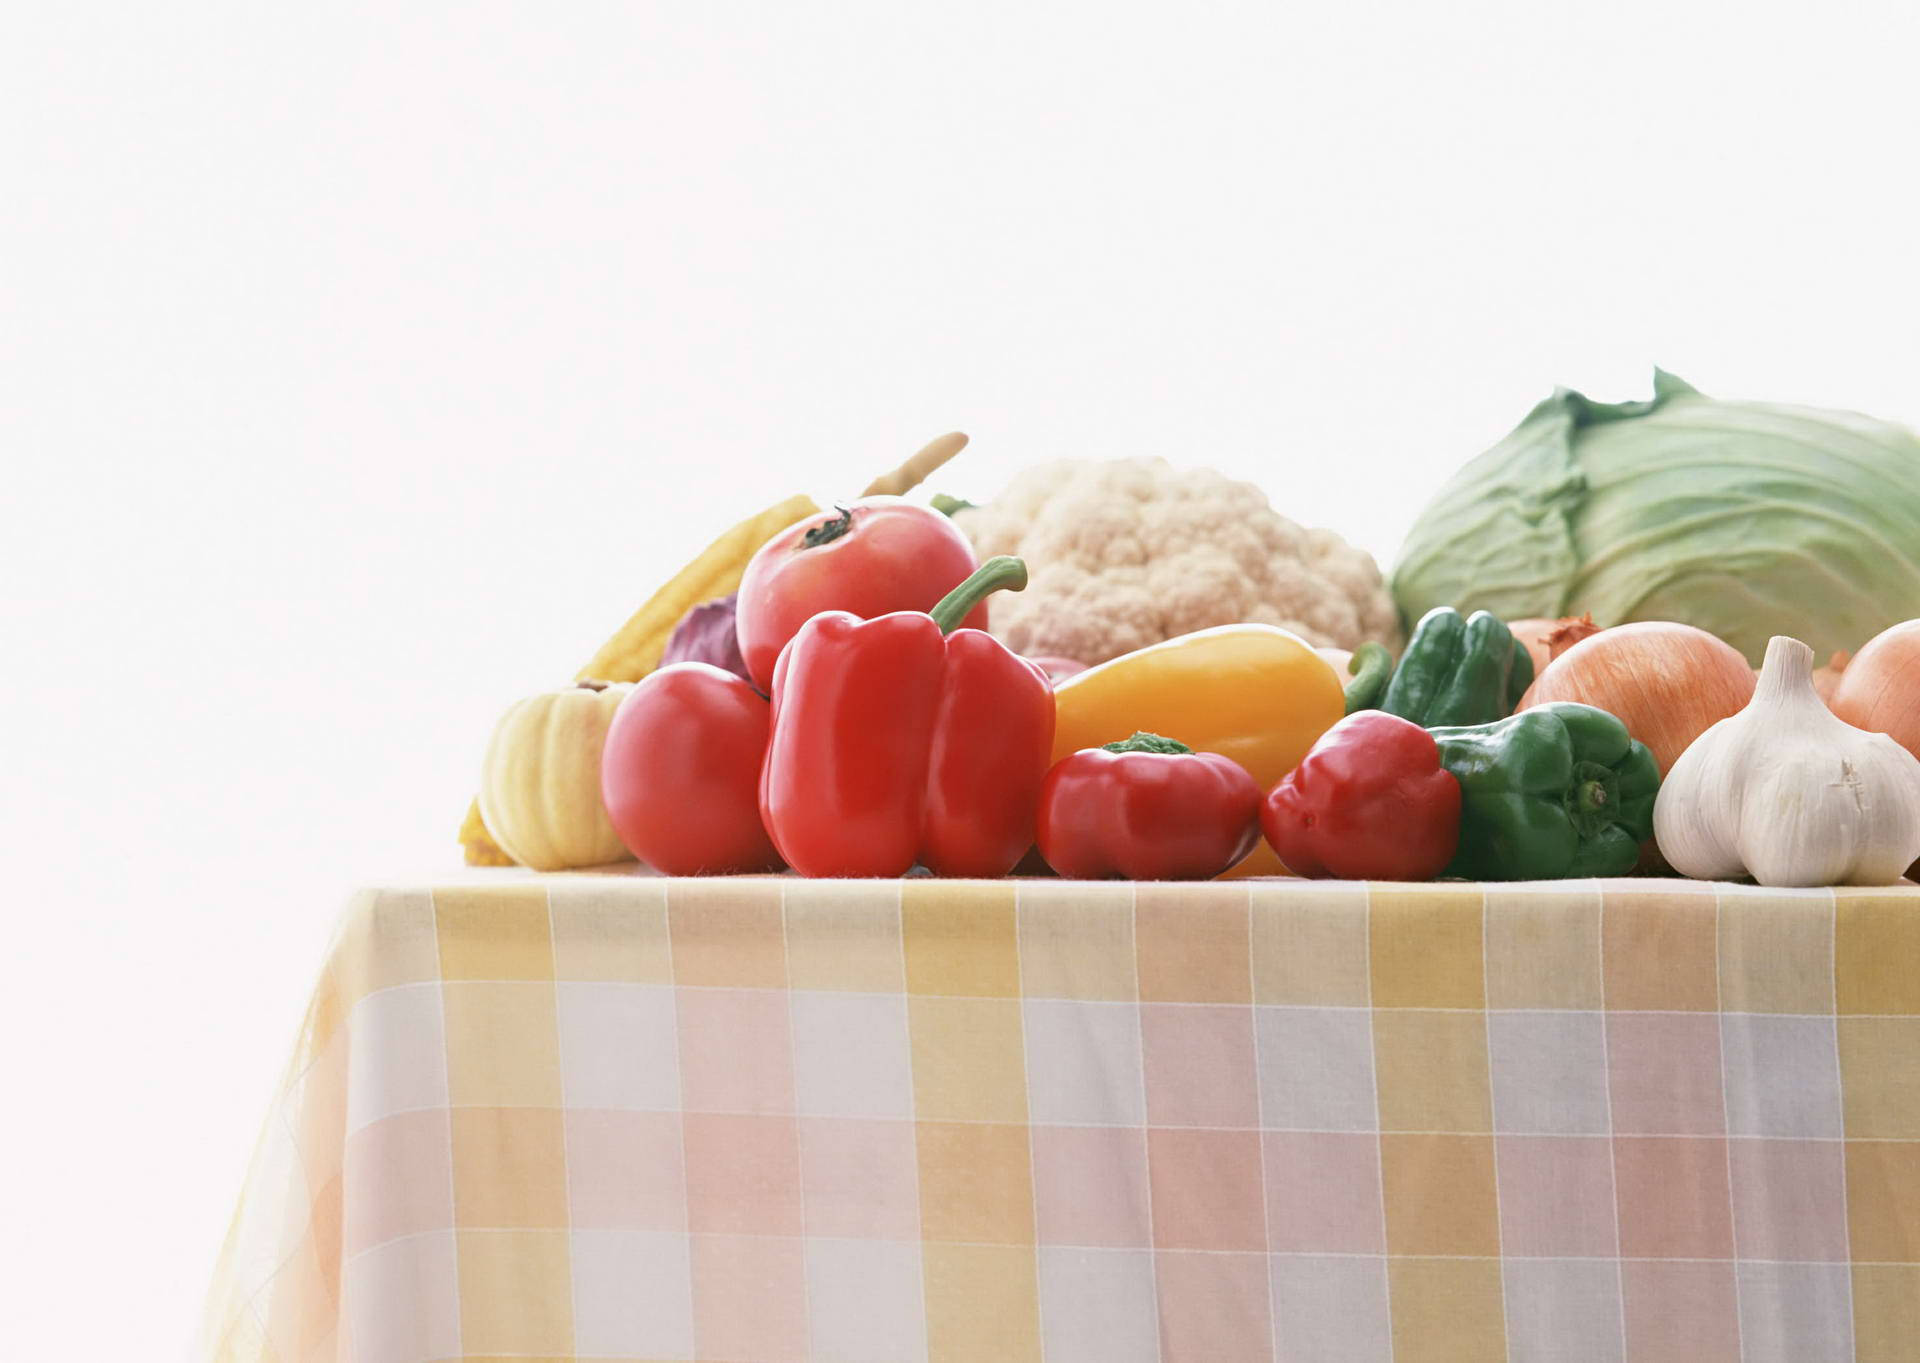 A Picnic Table Overflowing With Fresh Vegetables Background